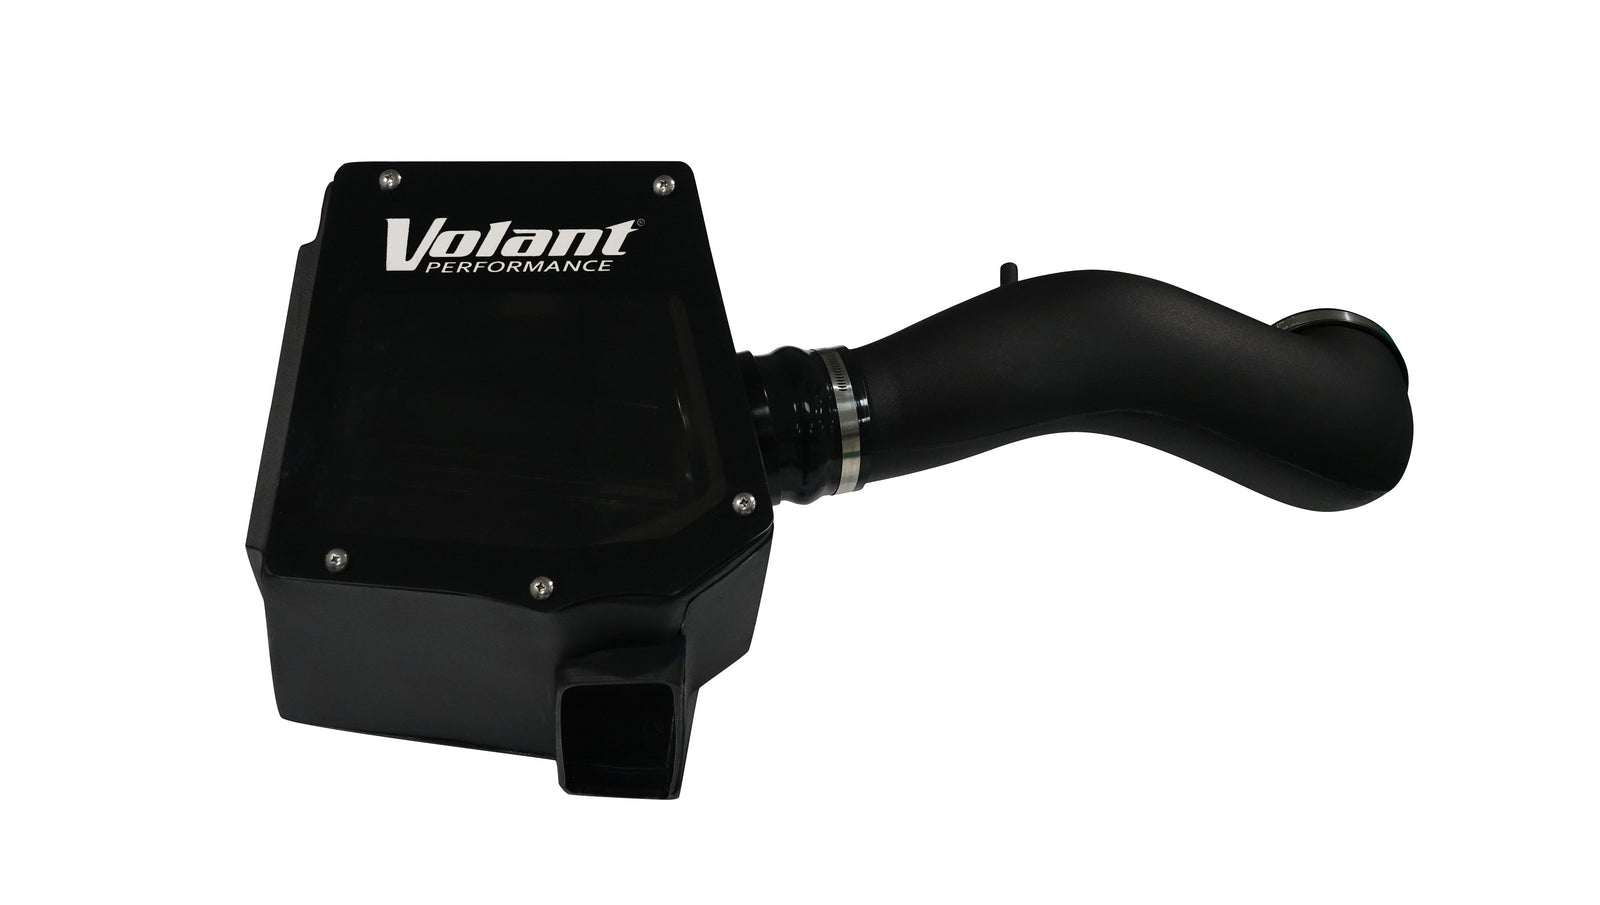 Volant Performance Cold Air Intakes - Trucks, SUVs and Cars.